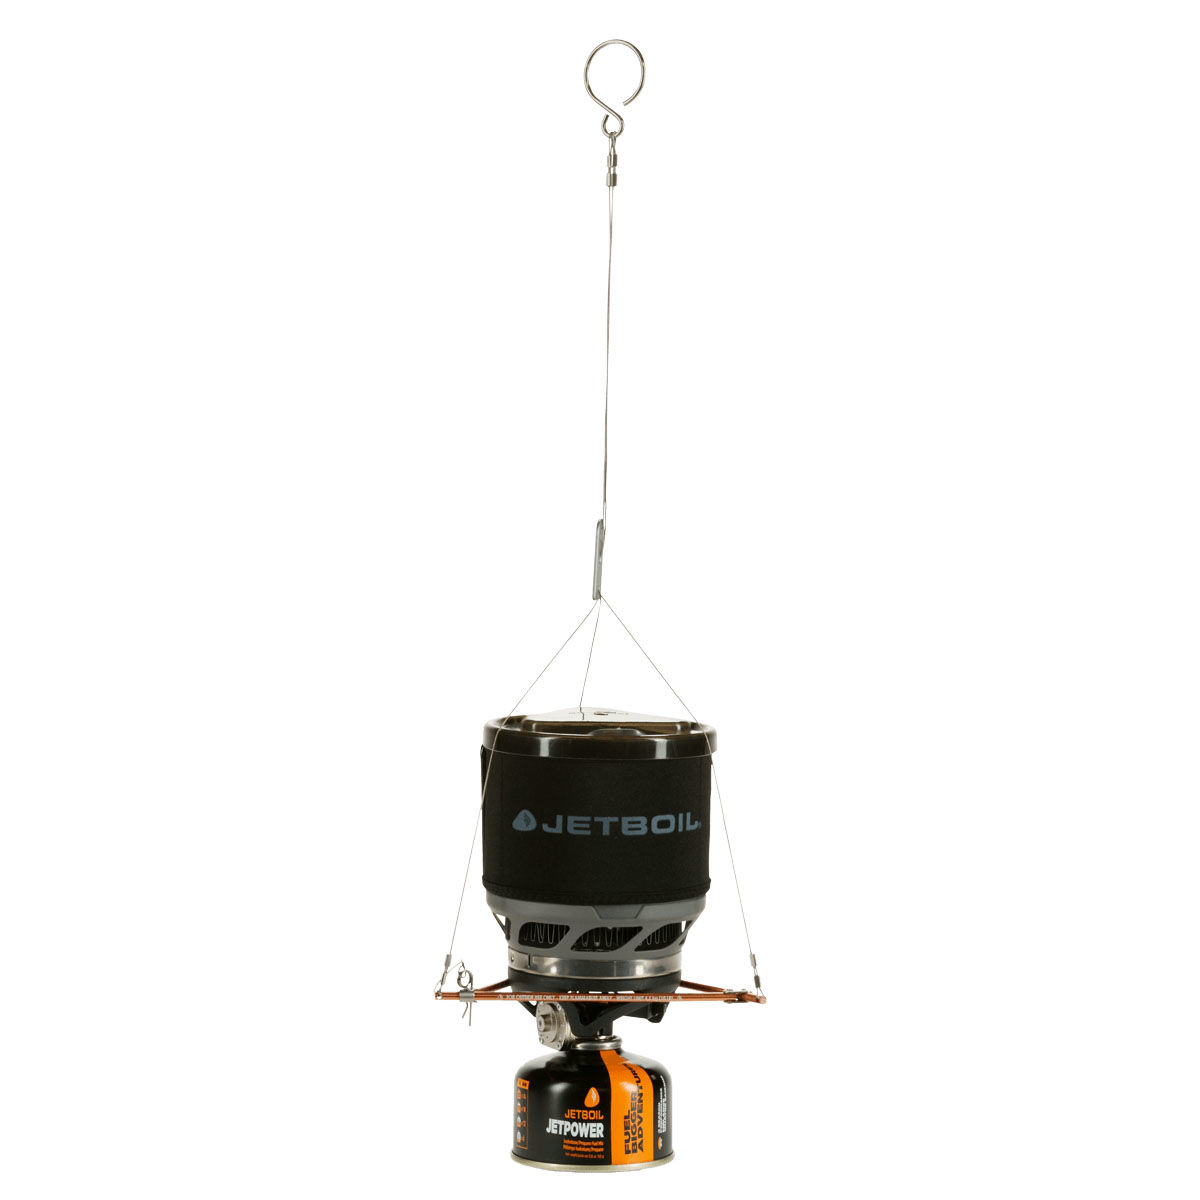 Hanging kit for Jetboil stove